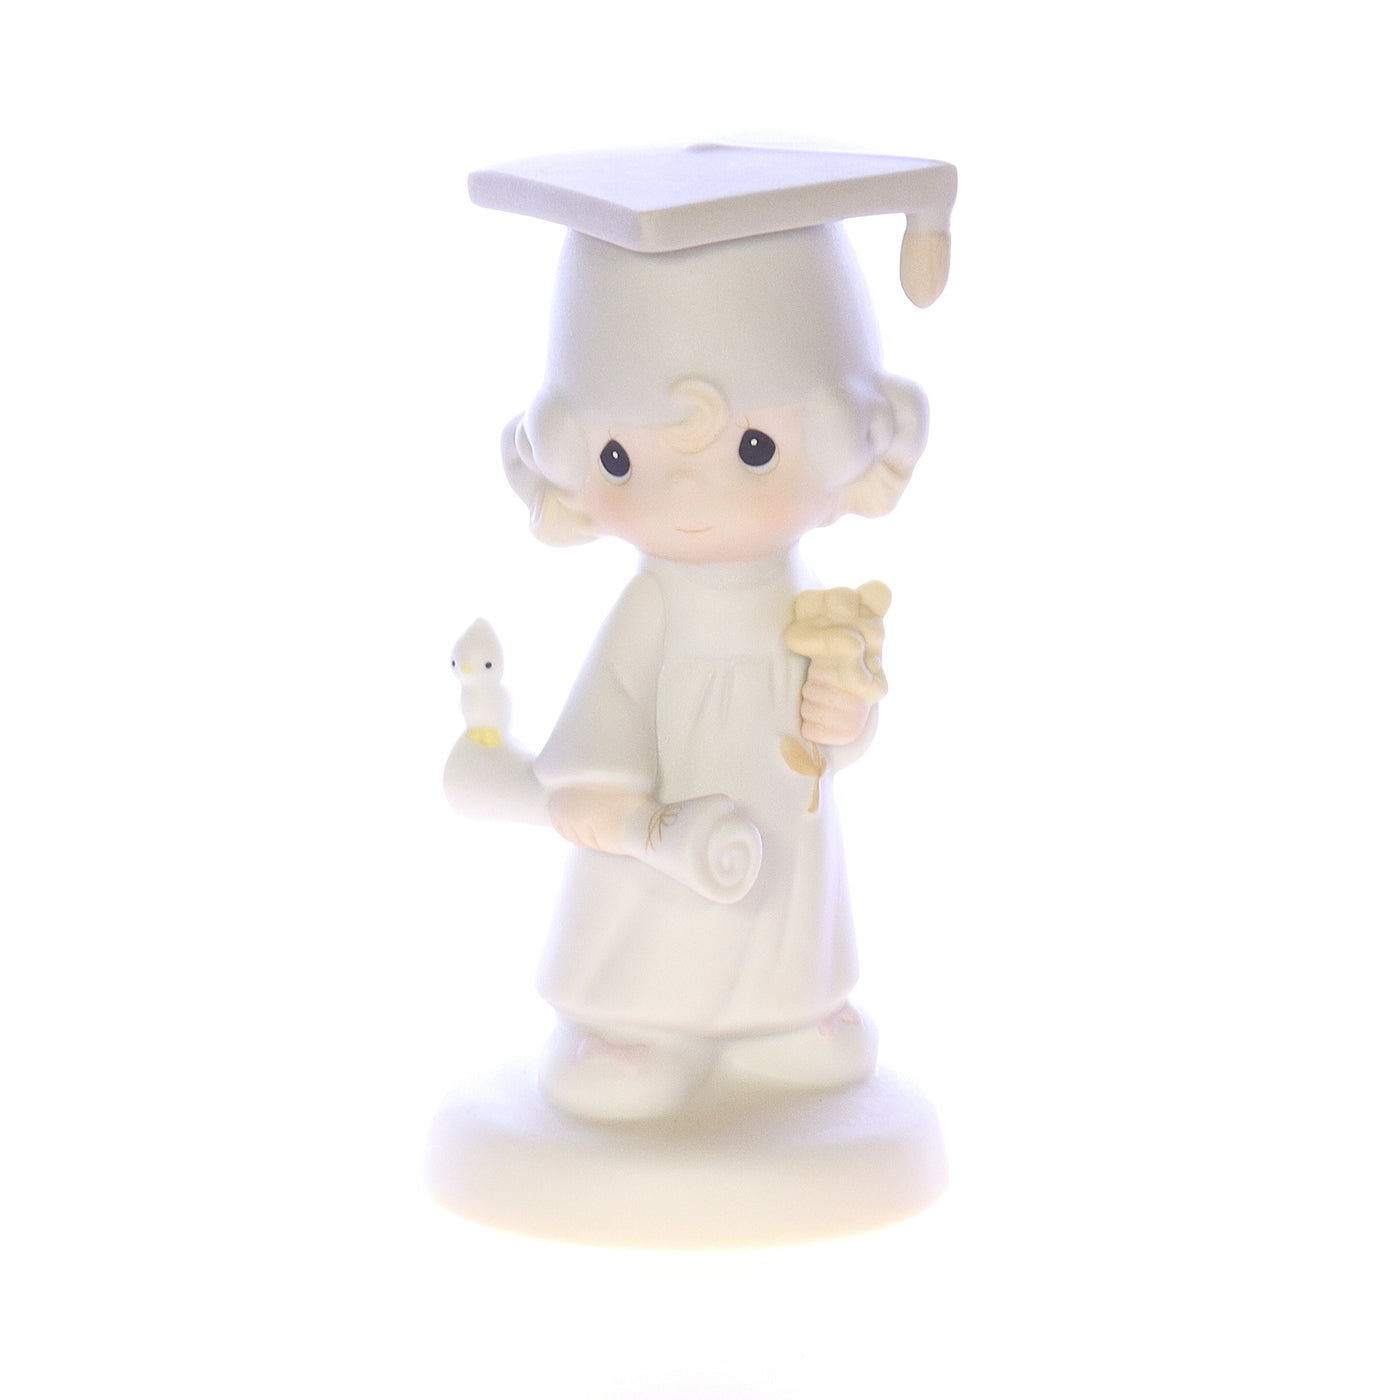 Precious_Moments_E-4721_The_Lord_Bless_You_And_Keep_You_Graduation_Figurine_1980_Box Front View